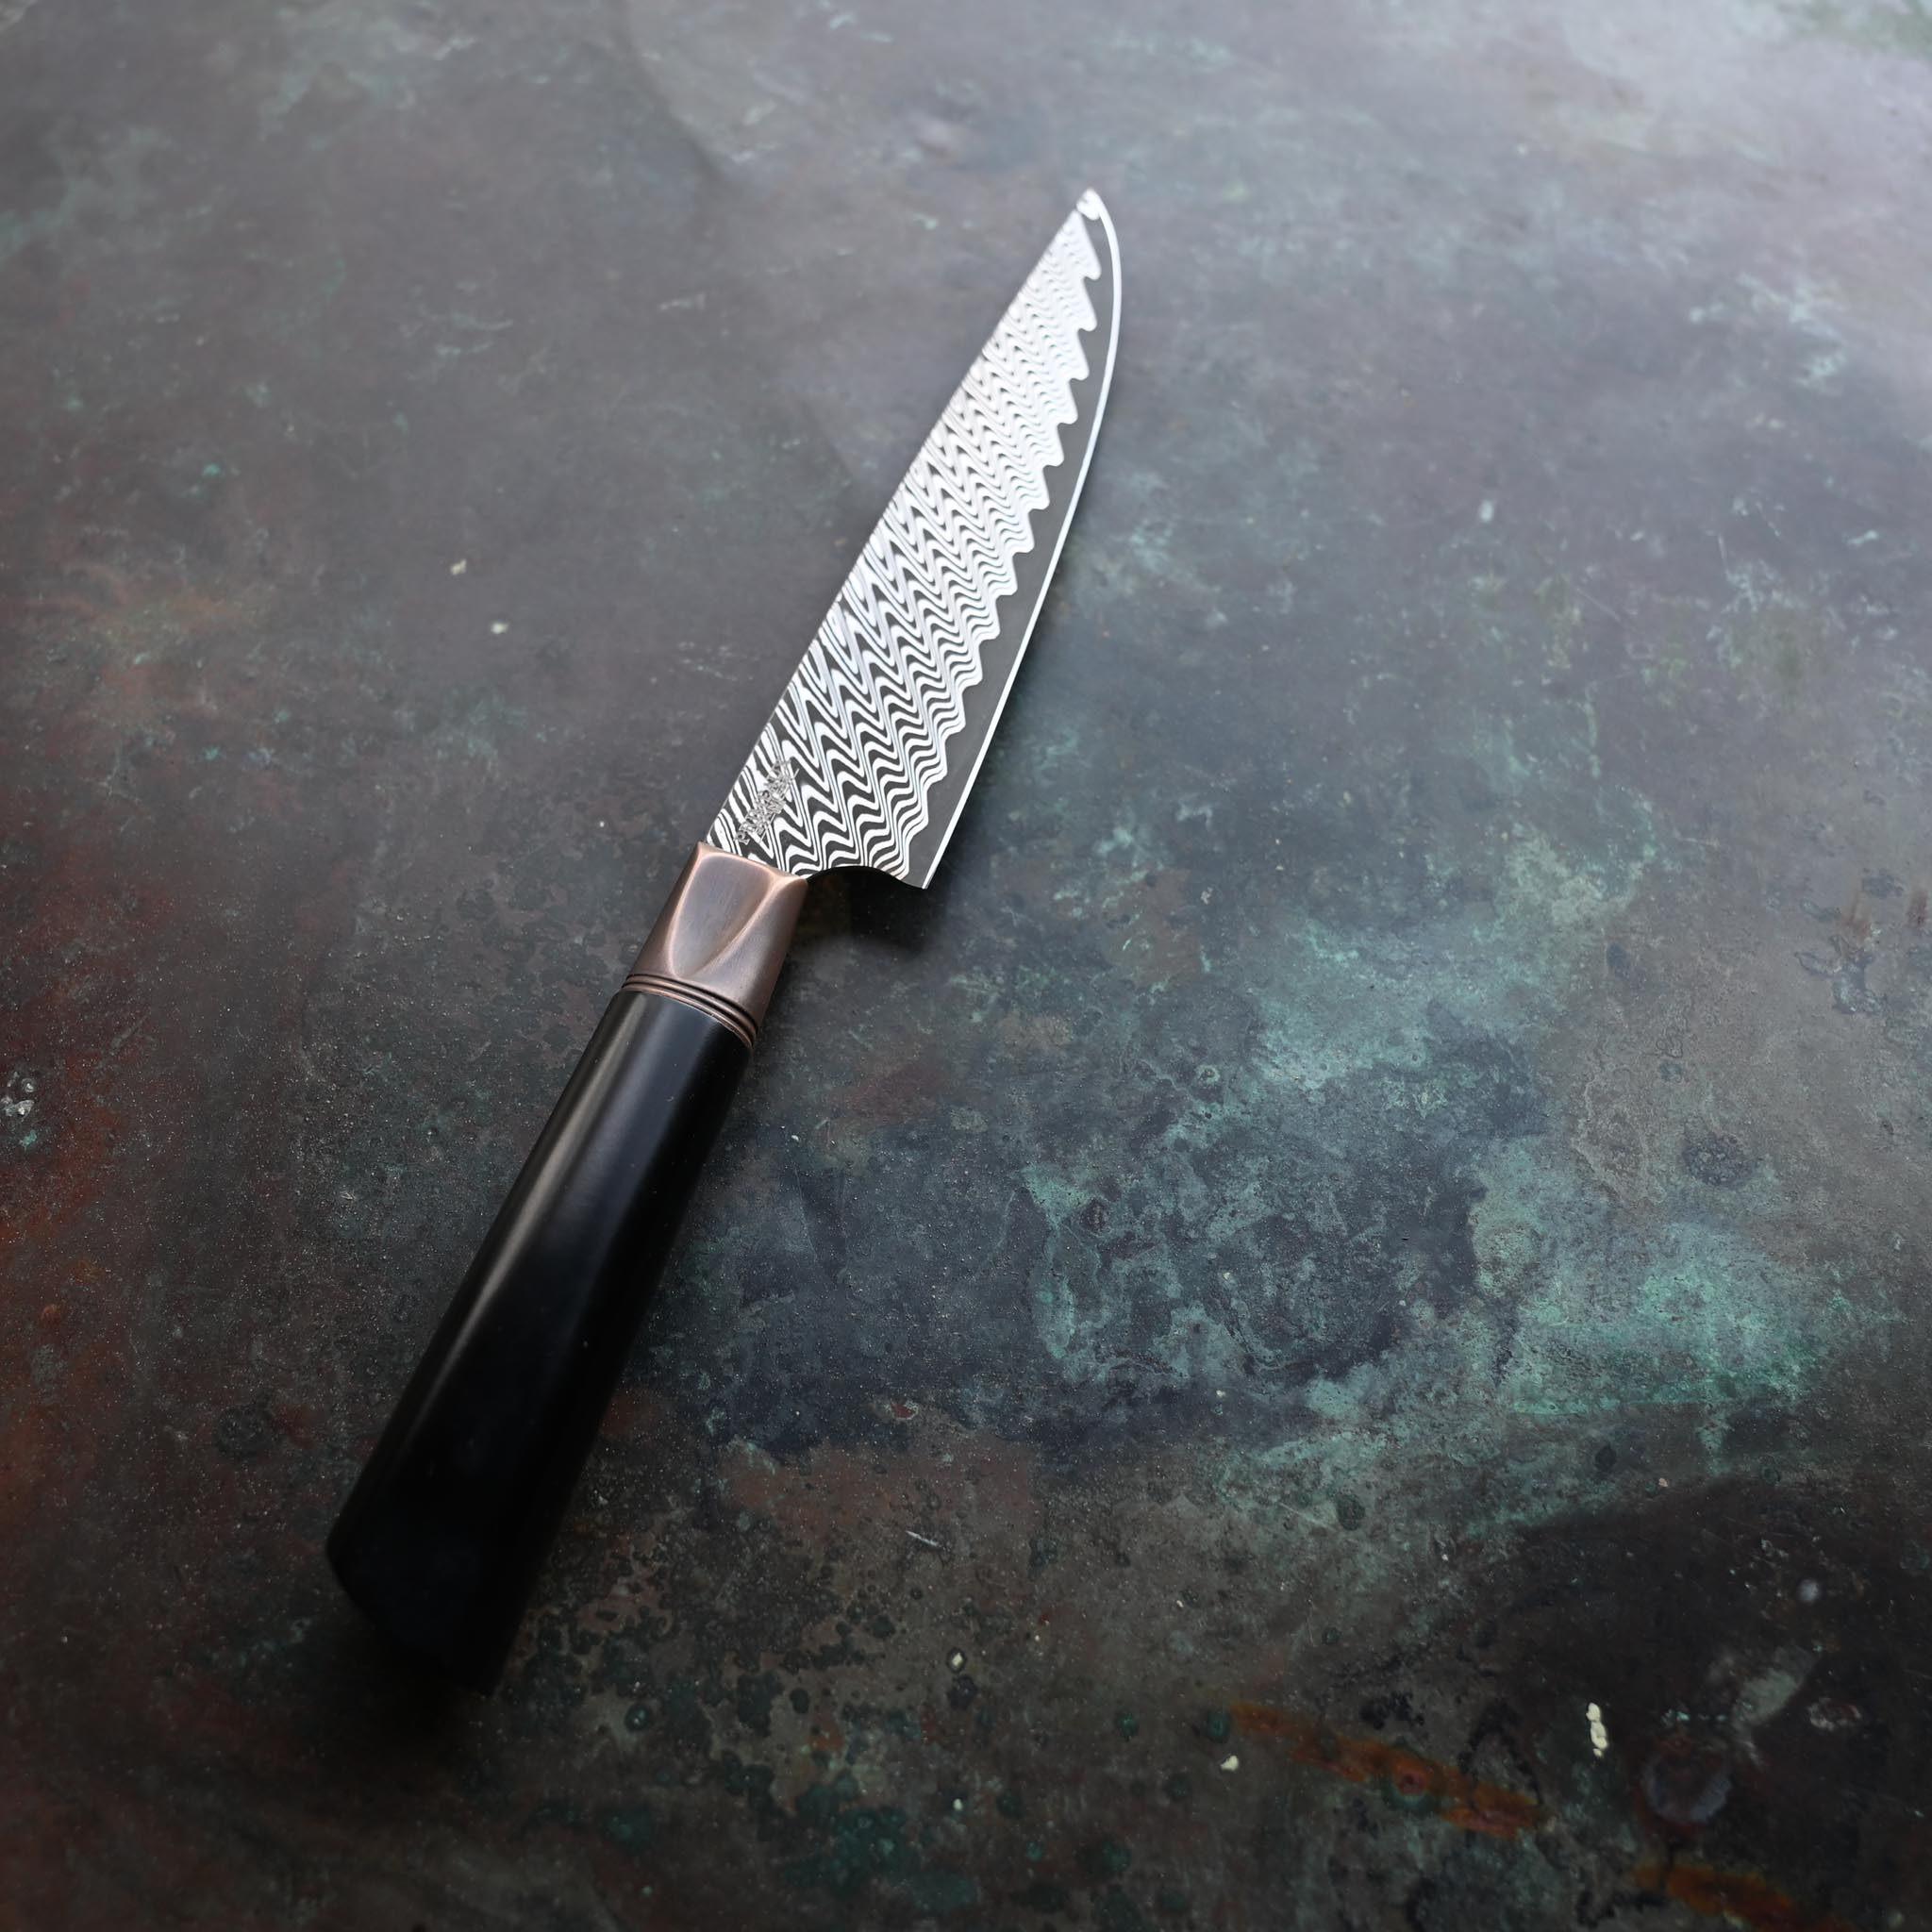 DAMASCUS STEEL PETTY KNIFE WITH ANTIQUE BOLSTER AND BLACK HANDLE ON CONCRETE BACKGROUND